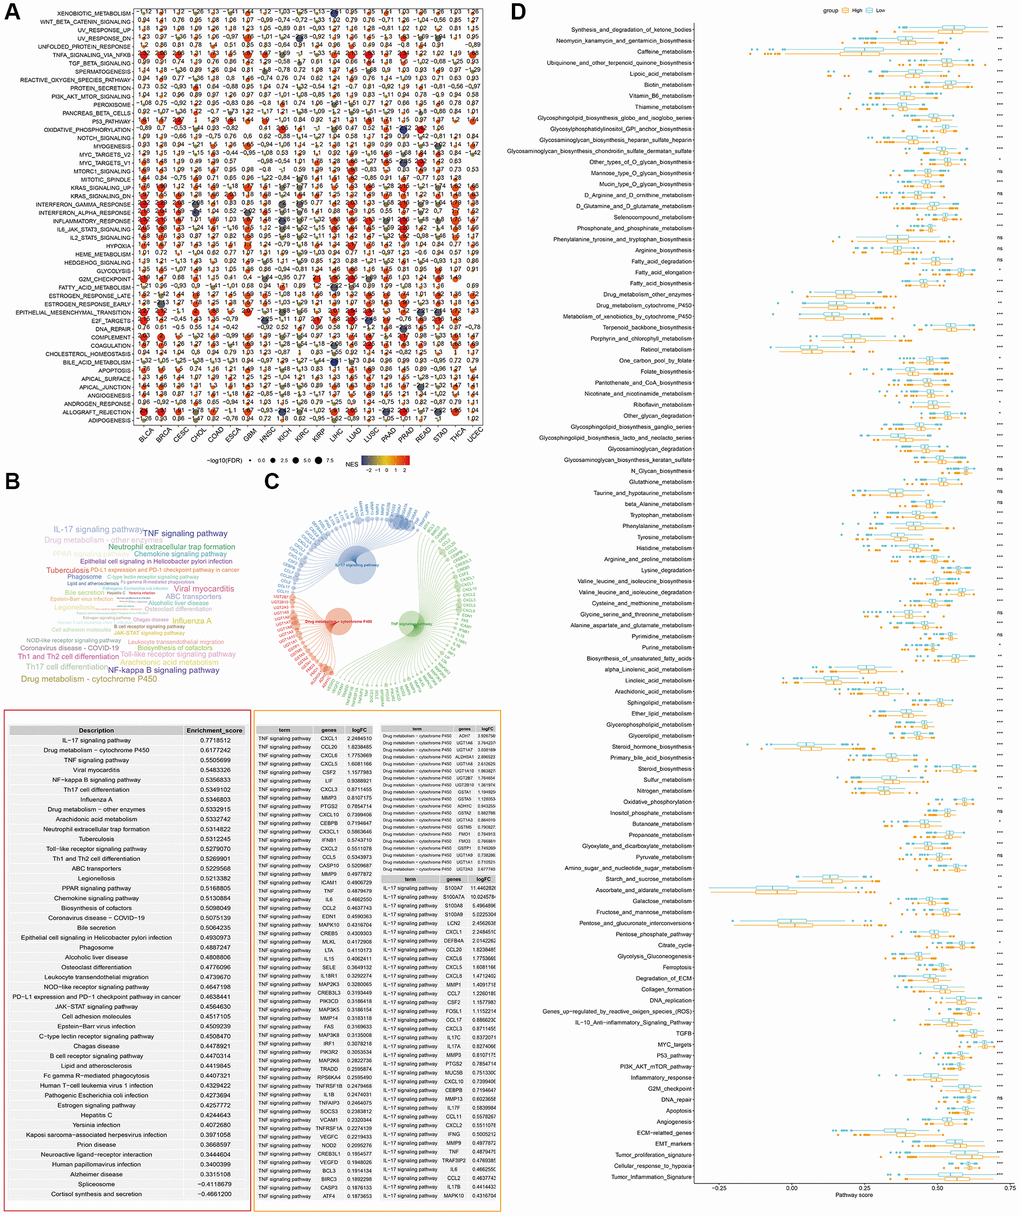 GSEA of DEGs between S100A7-high and -low expression groups pan-cancer. (A) Pan-cancer GSEA. (B) The GSEA results in breast cancer were shown using a word cloud map. (C) Top three potential pathways according to GSEA results in breast cancer. (D) Pathway score in the S100A7-high and -low expression groups in breast cancer. Abbreviations: GSEA: Gene Set Enrichment Analysis; DEGs: differentially expressed genes.